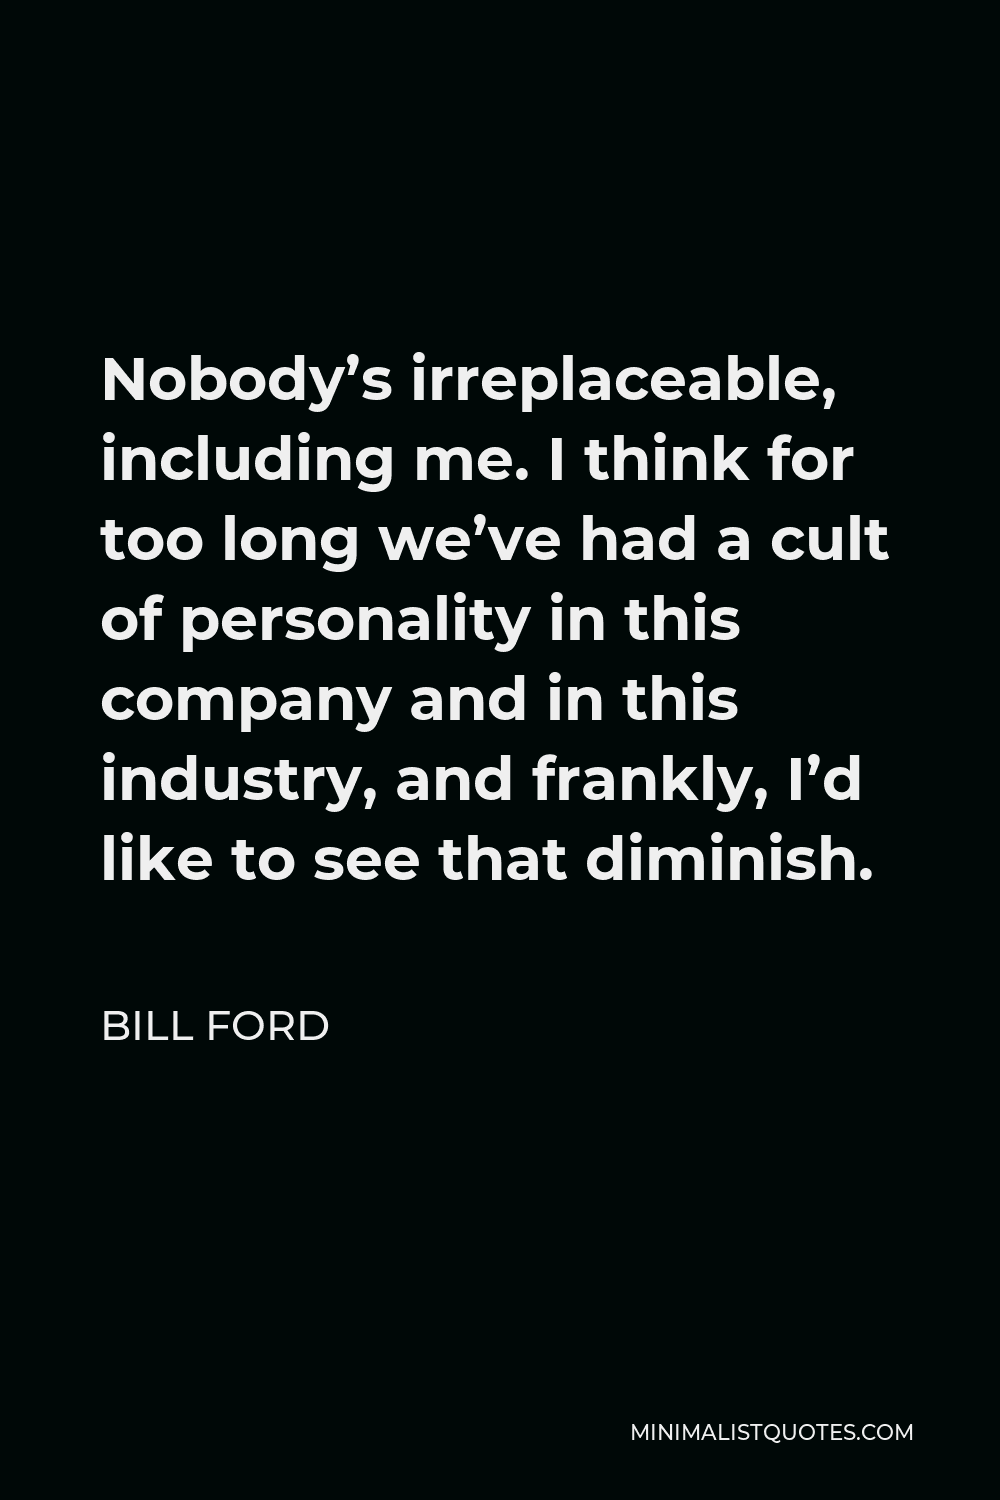 Bill Ford Quote - Nobody’s irreplaceable, including me. I think for too long we’ve had a cult of personality in this company and in this industry, and frankly, I’d like to see that diminish.